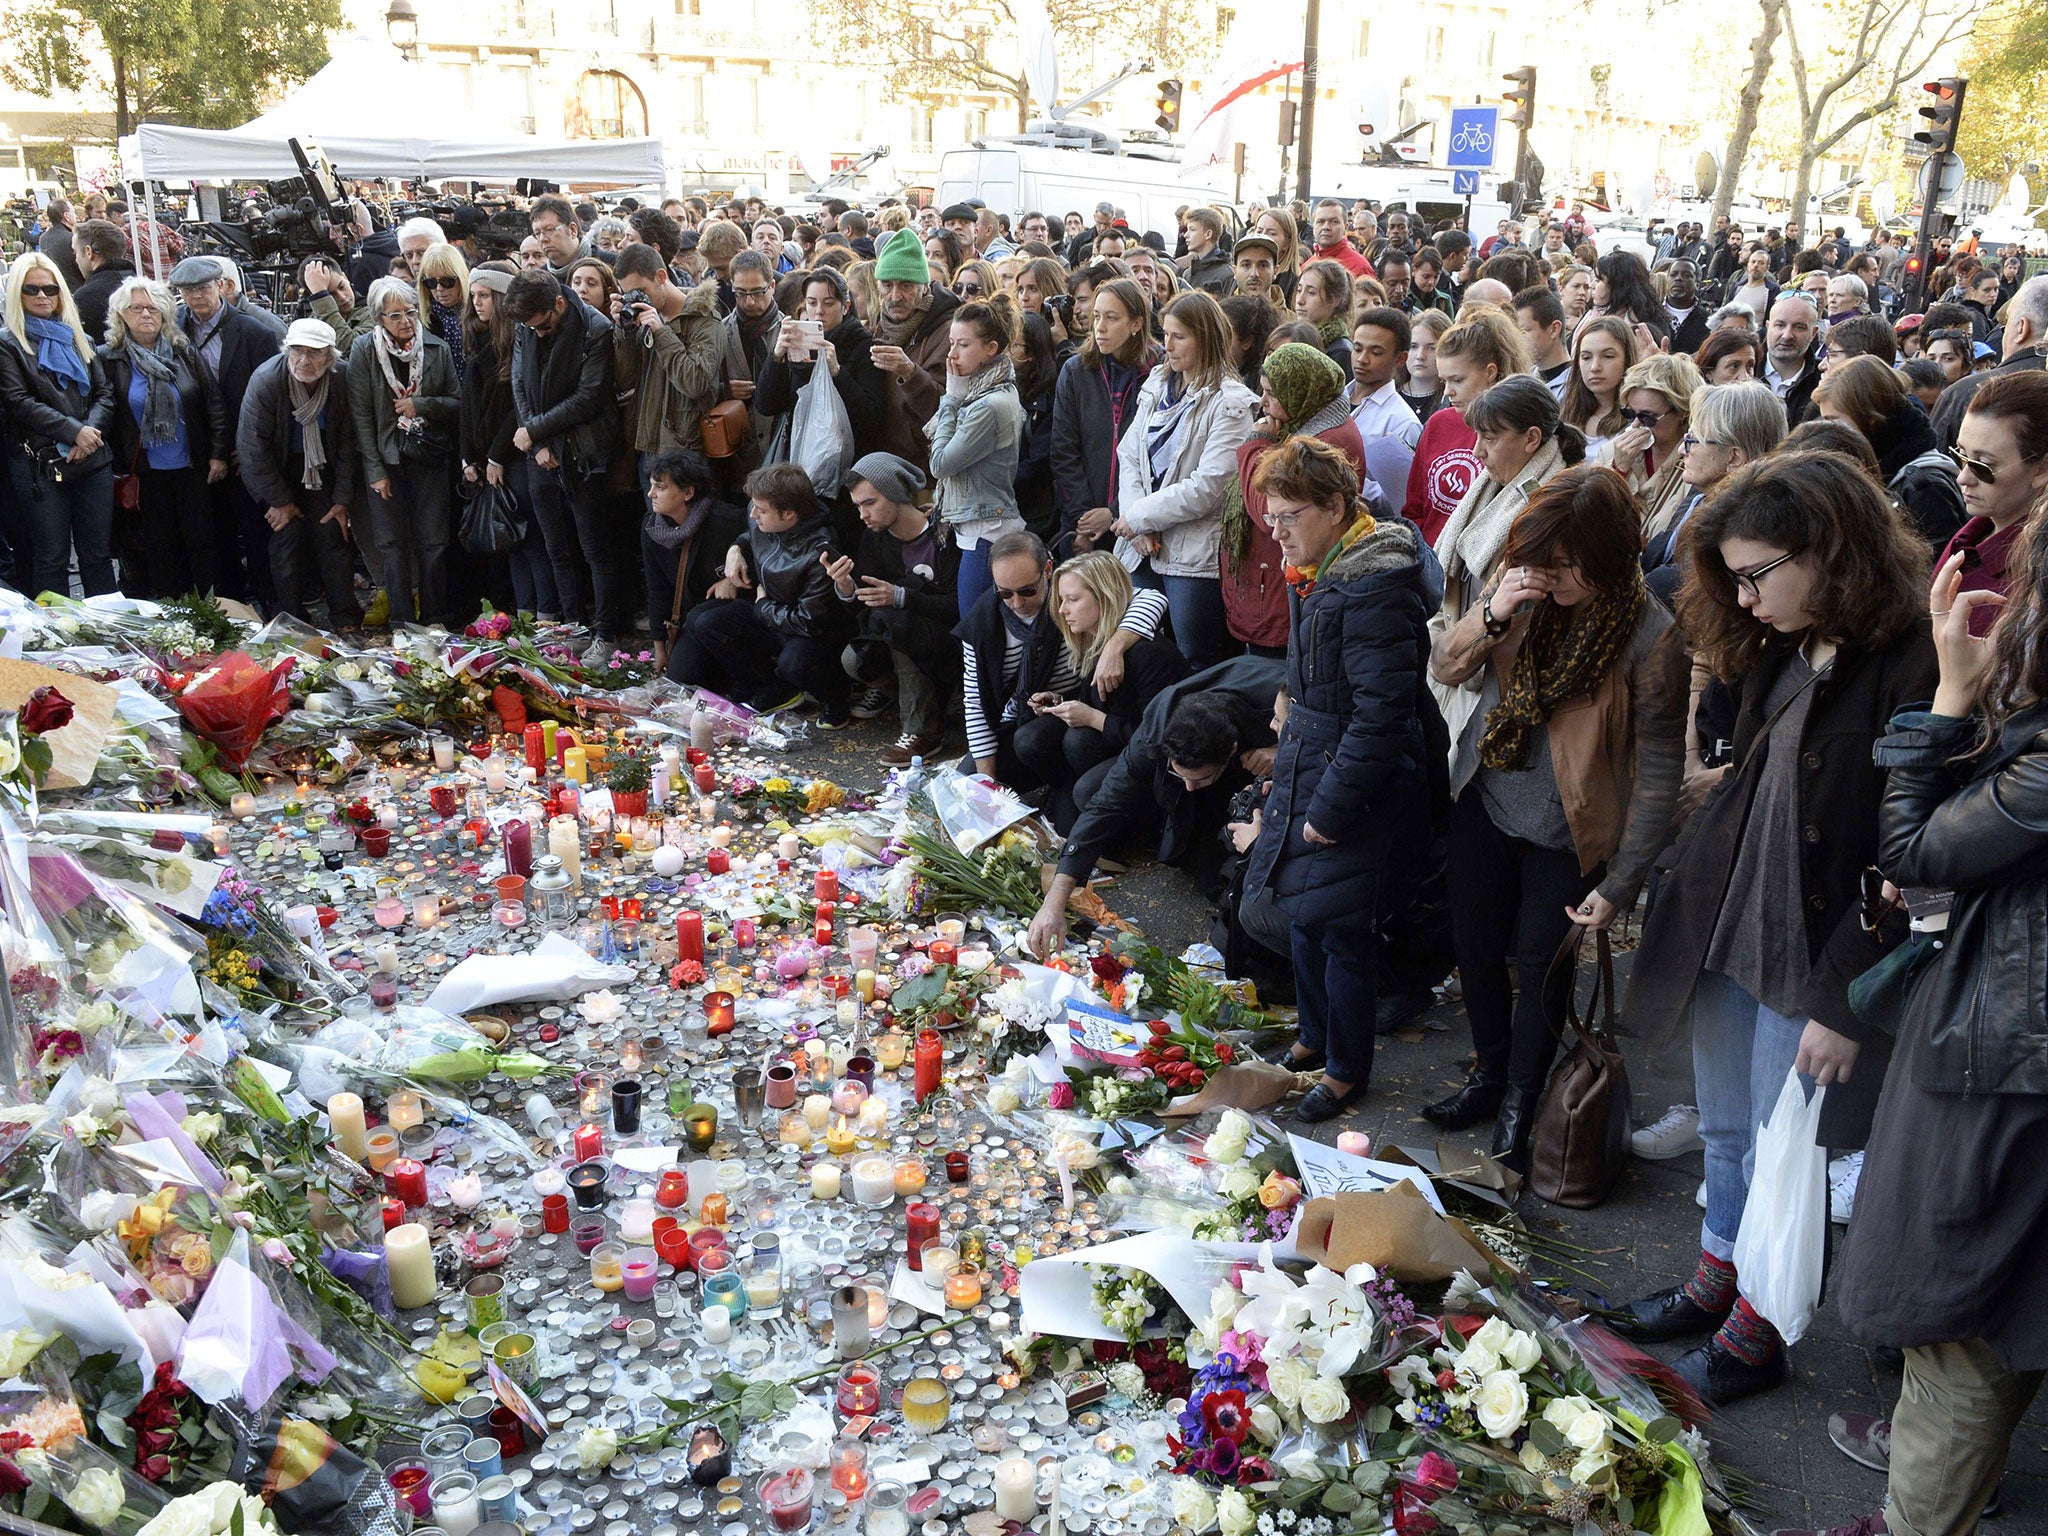 A memorial close to the Bataclan concert hall, where more than 80 people lost their lives